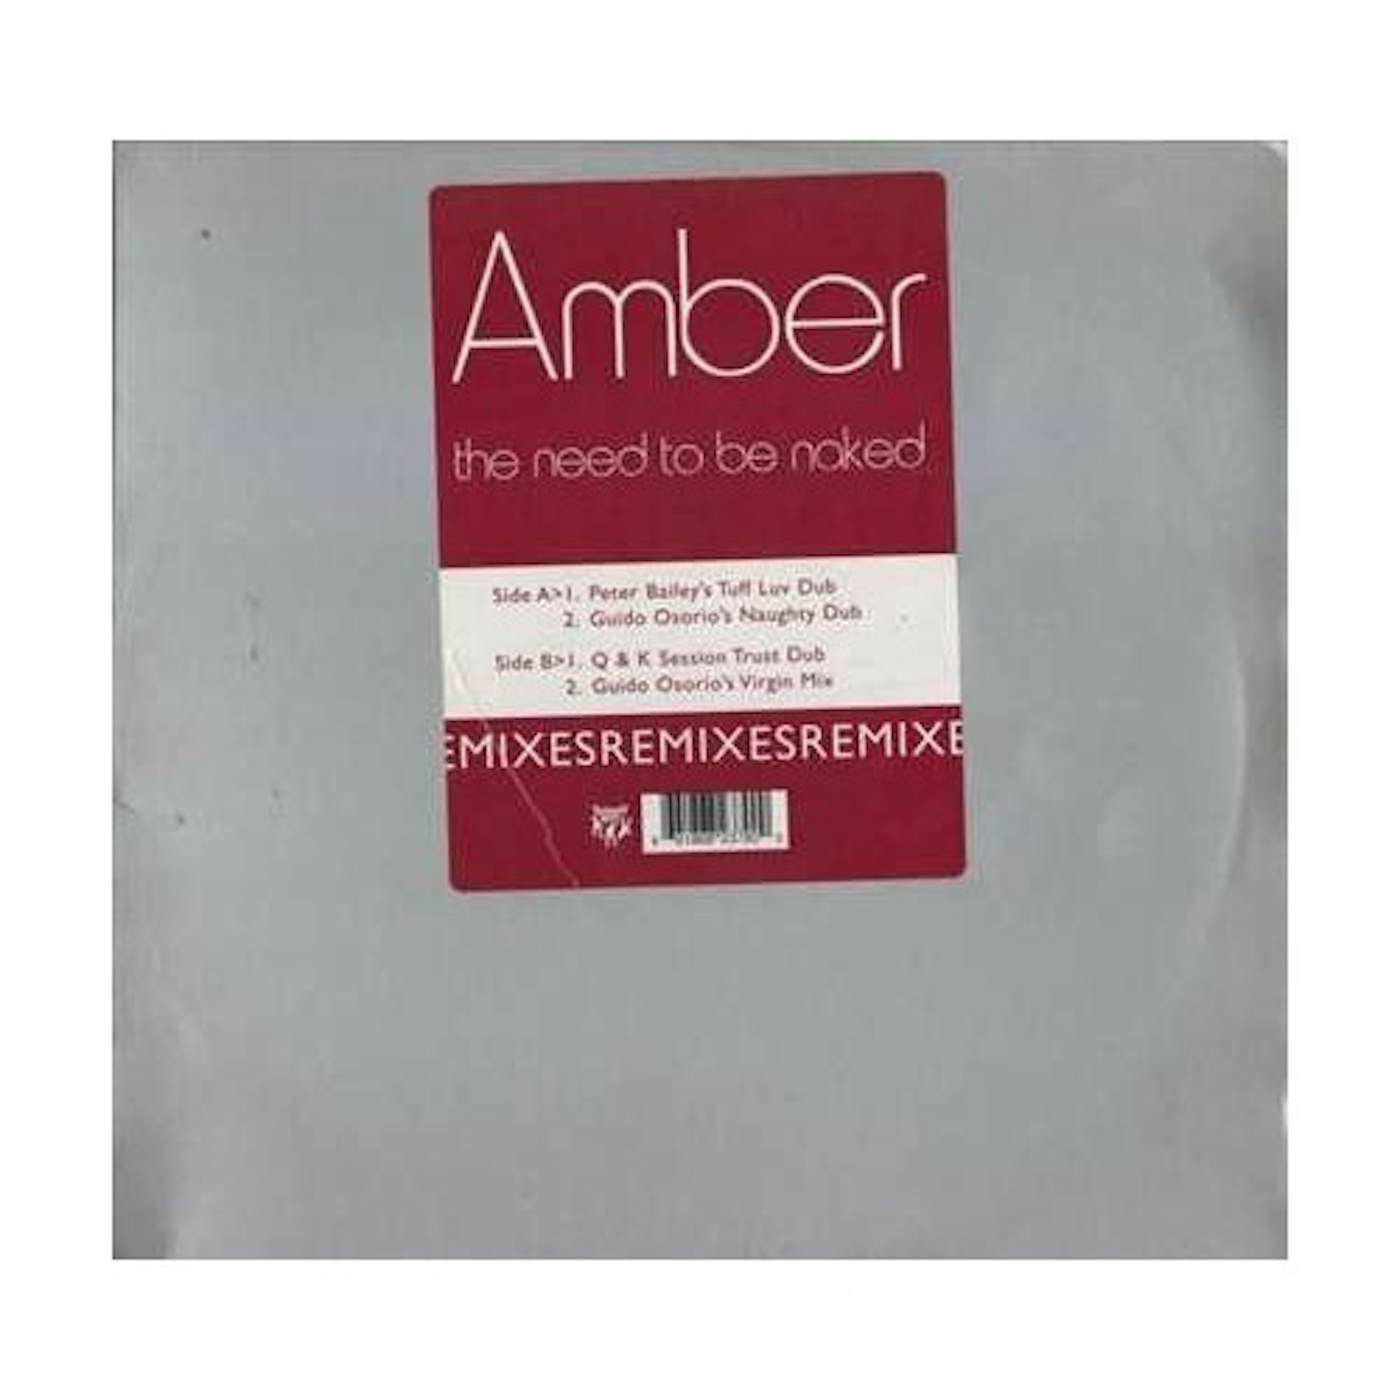 Amber NEED TO BE NAKED: REMIXES Vinyl Record